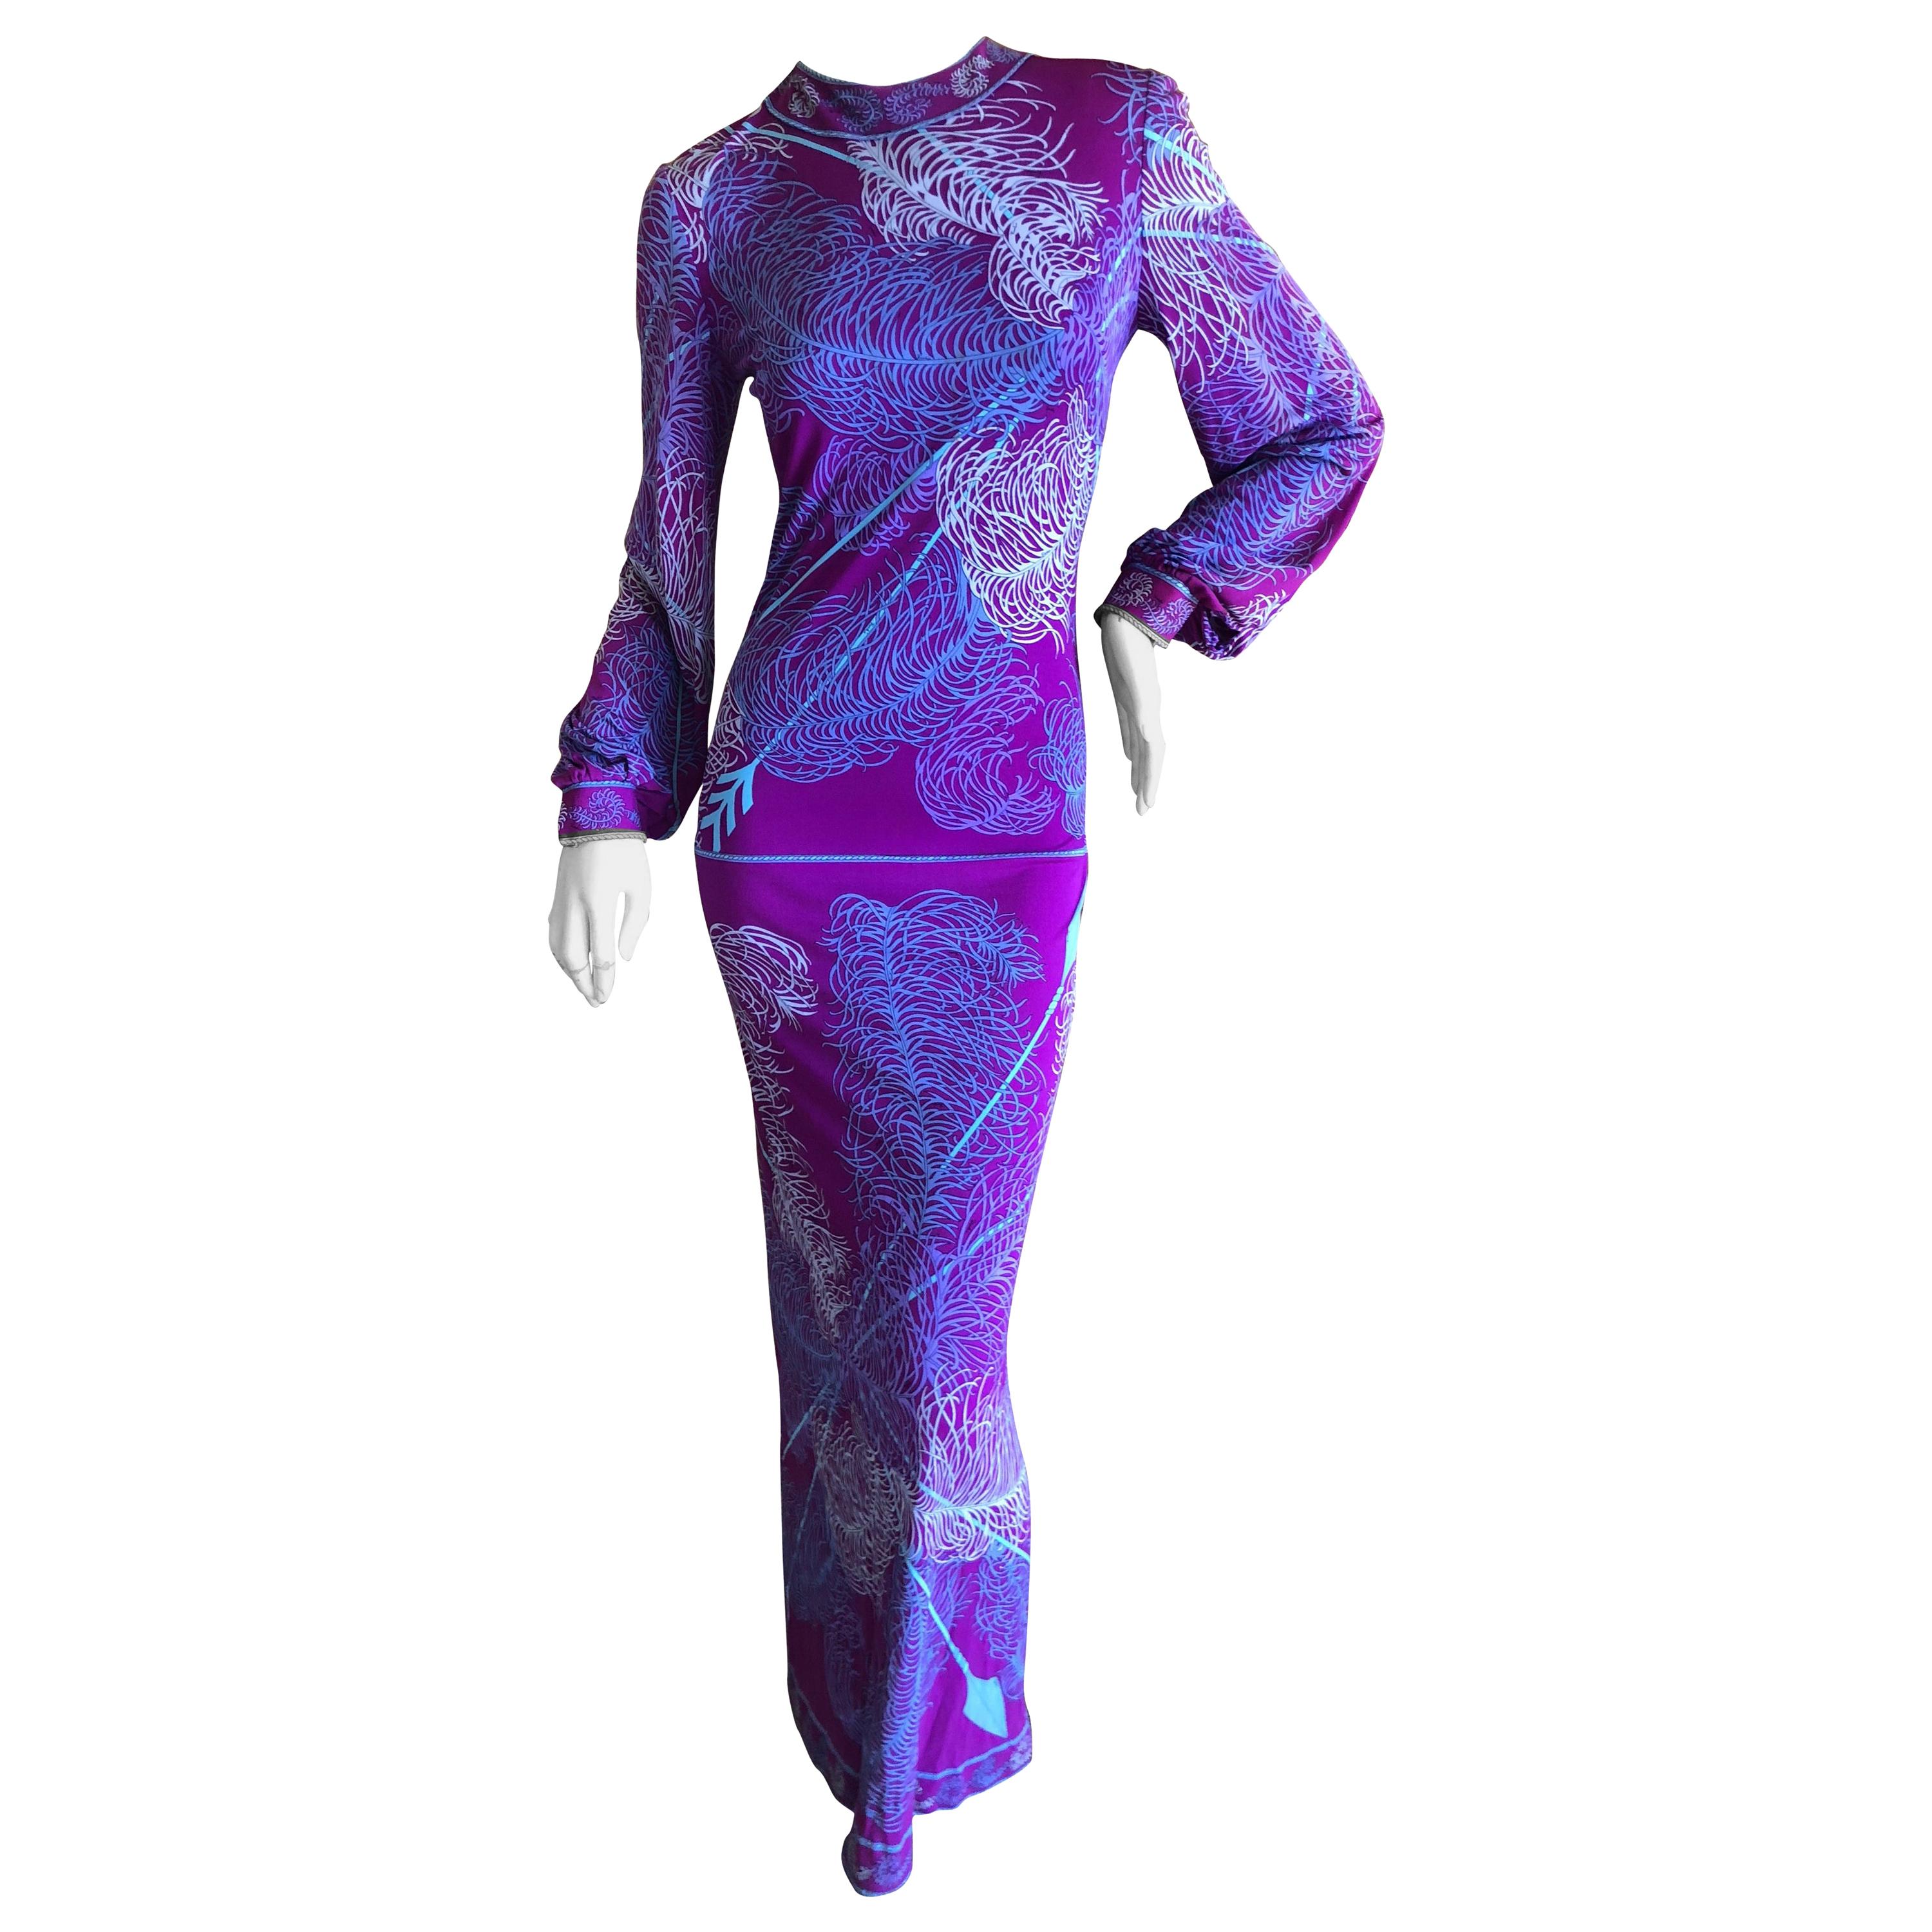 Emilio Pucci Vintage 1960's Silk Jersey Evening Dress for Saks Fifth Avenue For Sale